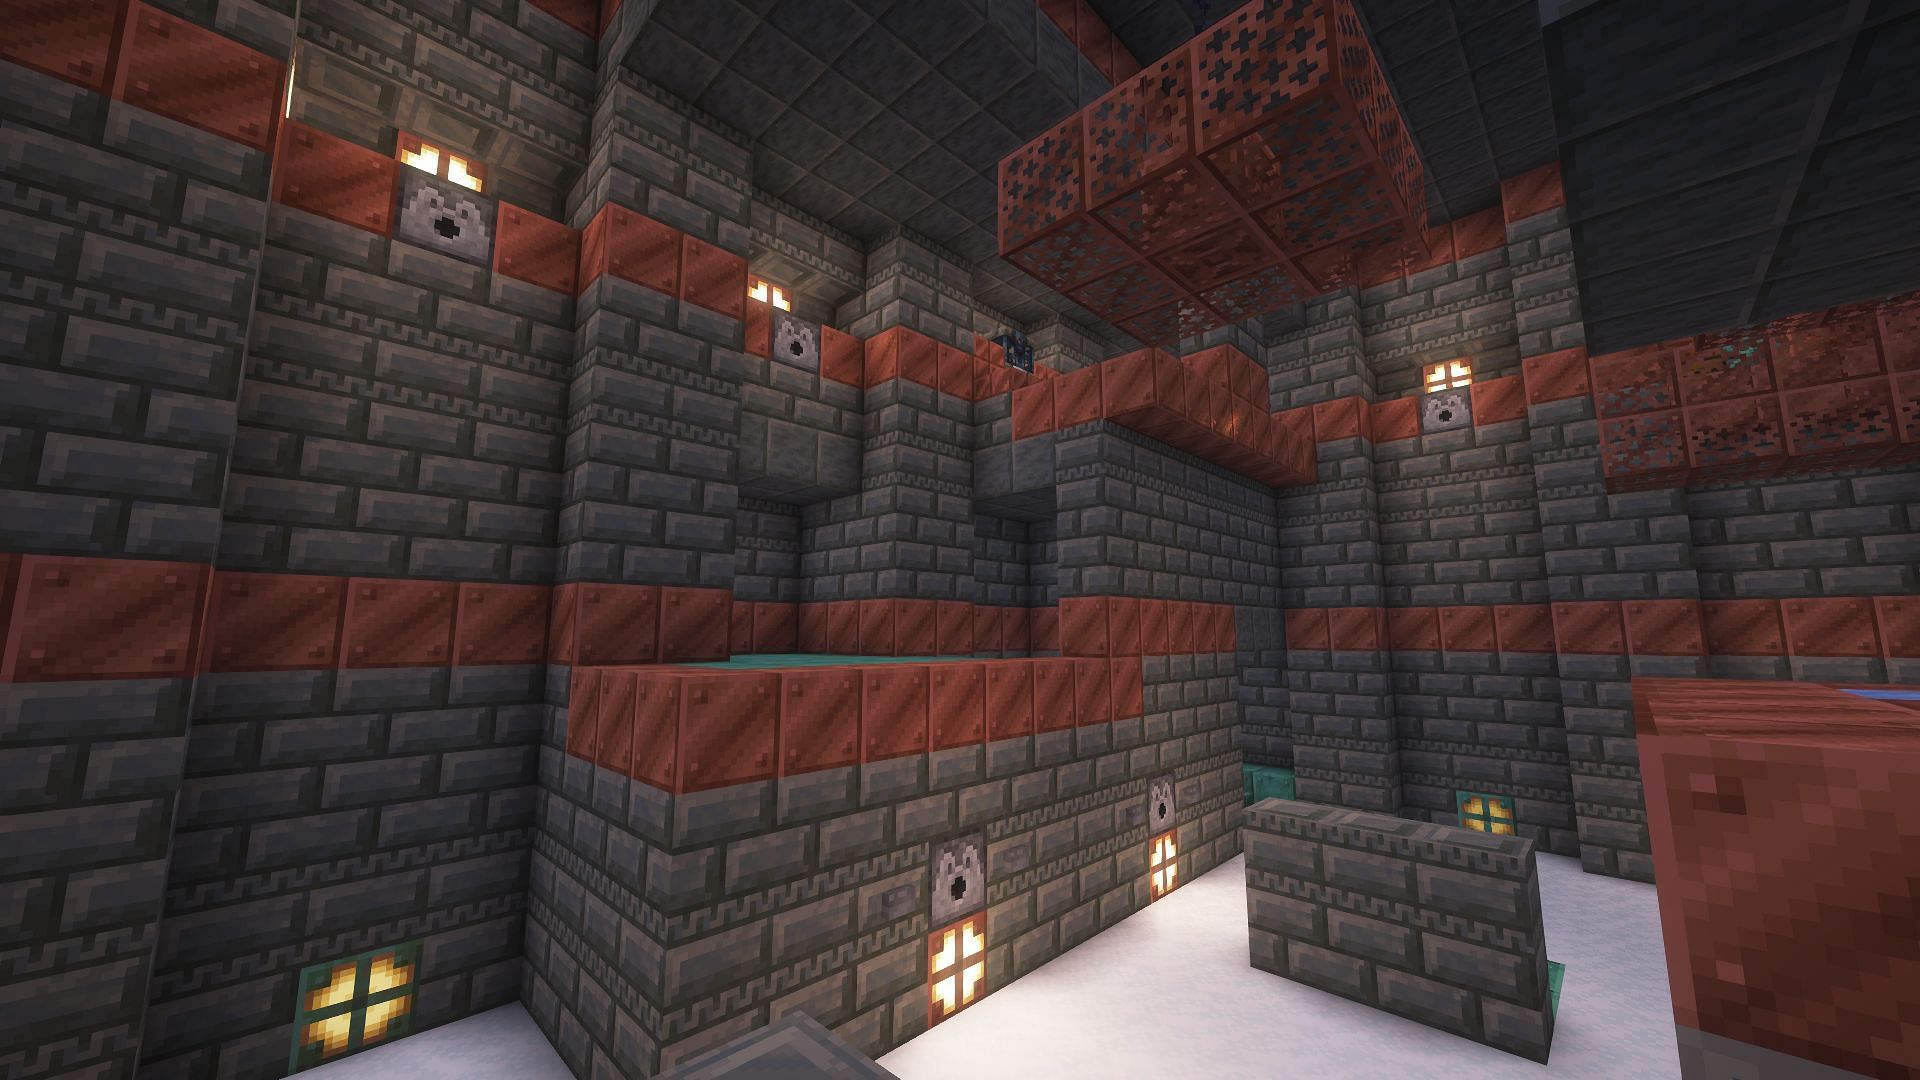 Several dispensers can be found in a chamber of the trial chamber (Imager via Mojang)